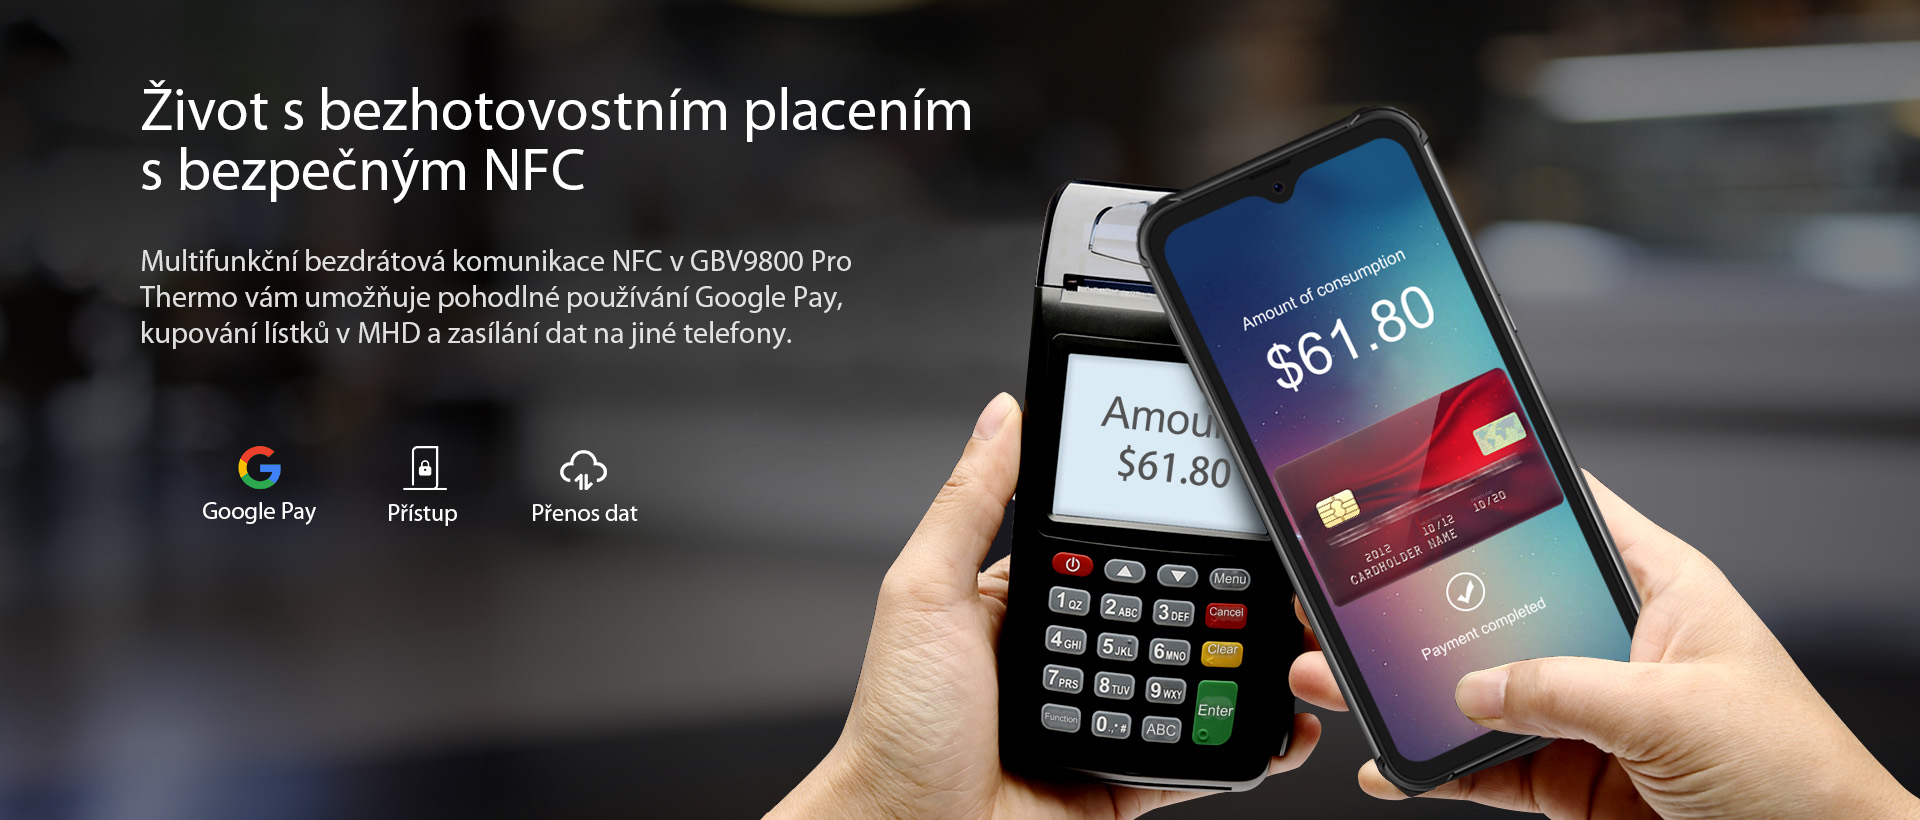 iGET BLACKVIEW GBV9800 Pro Thermo